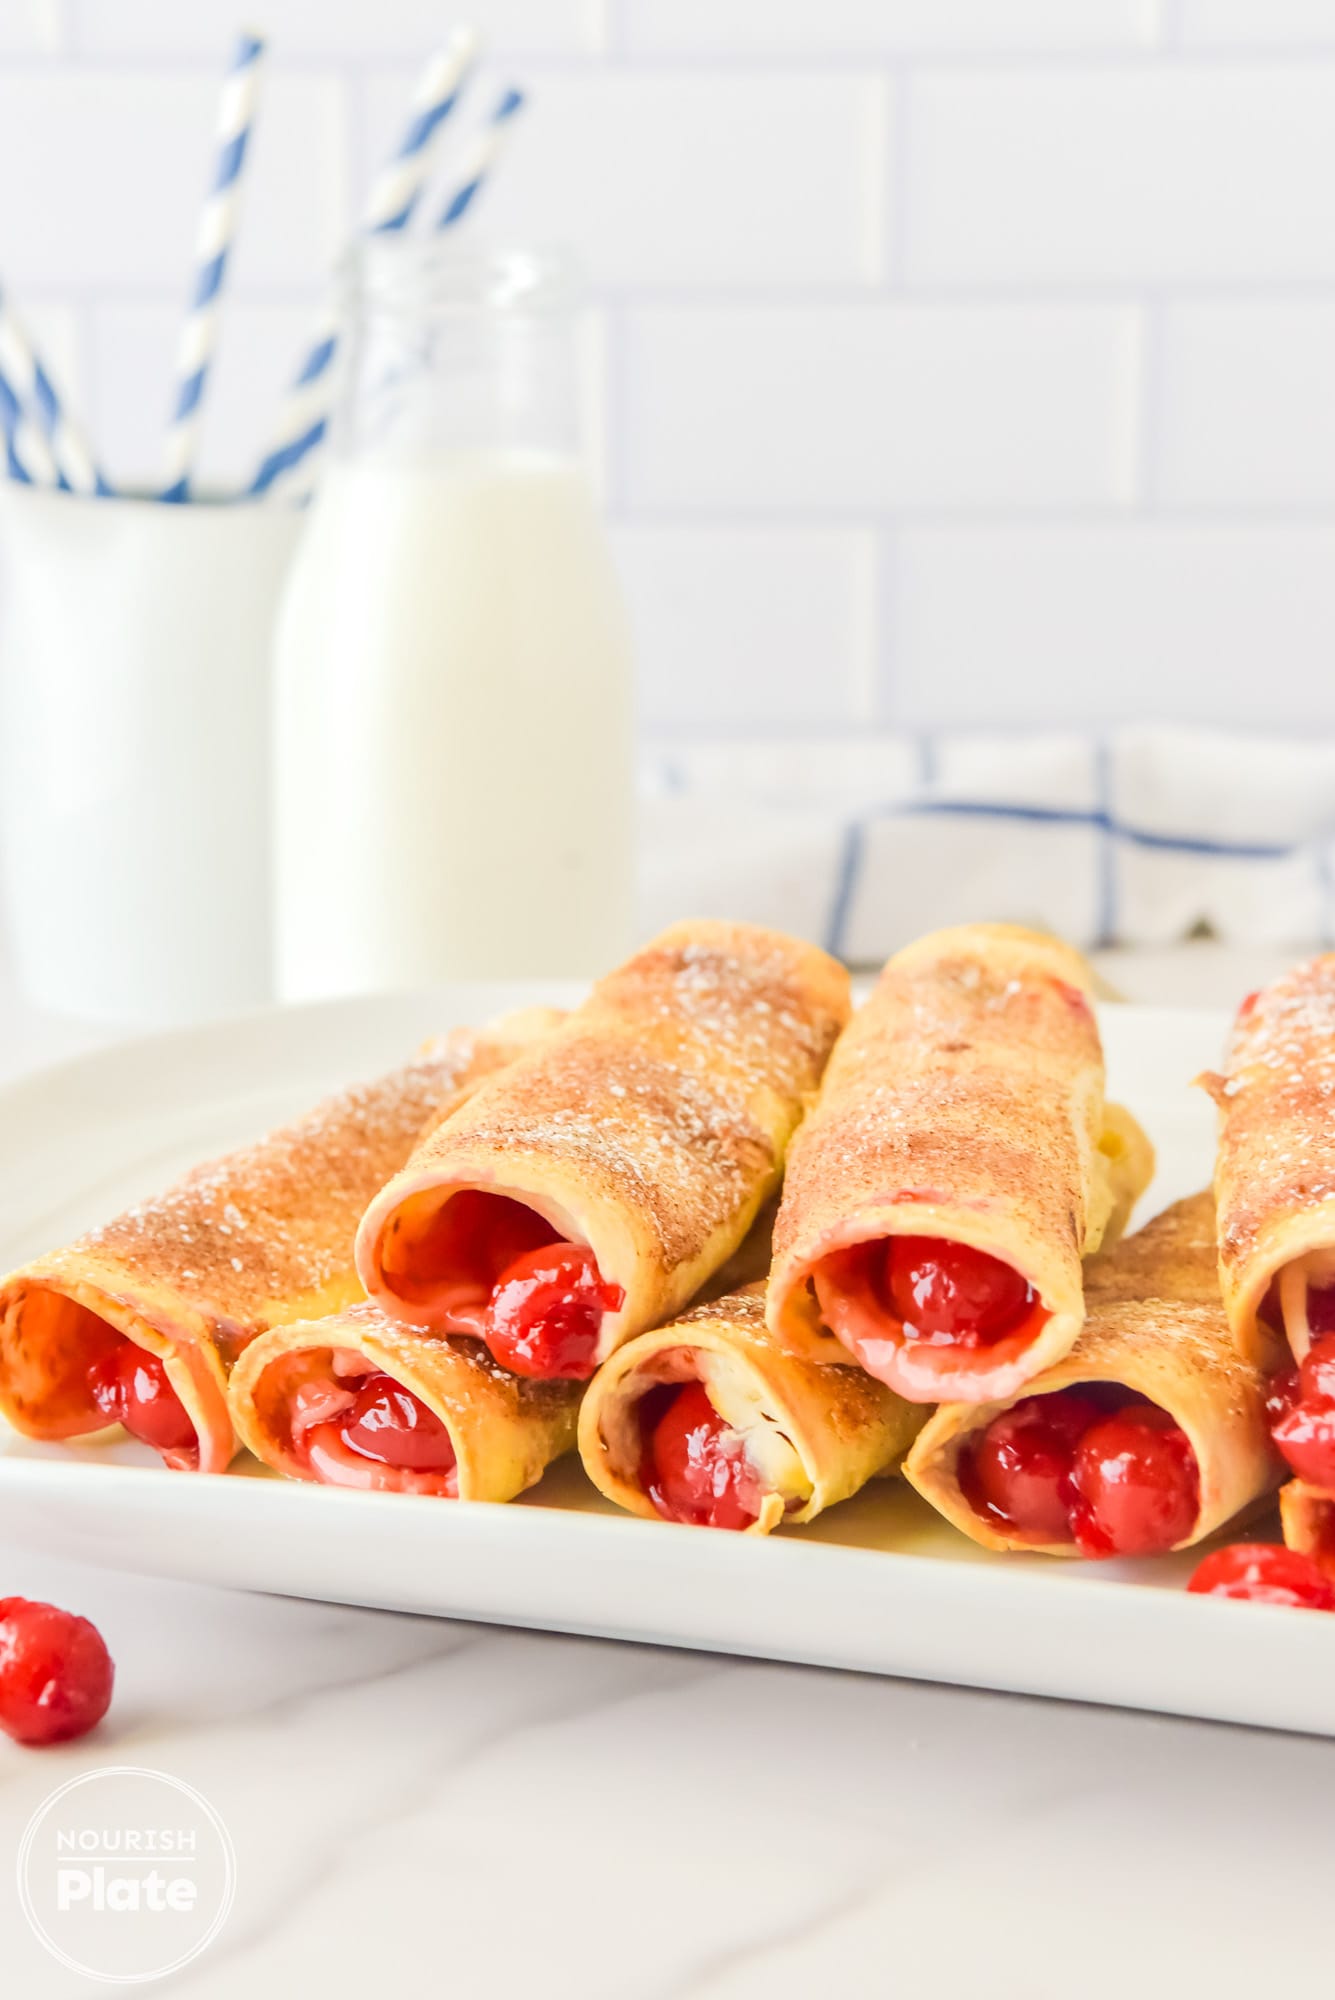 Stacked Cherry Cheesecake Taquitos on a plate, with a glass of milk in the background